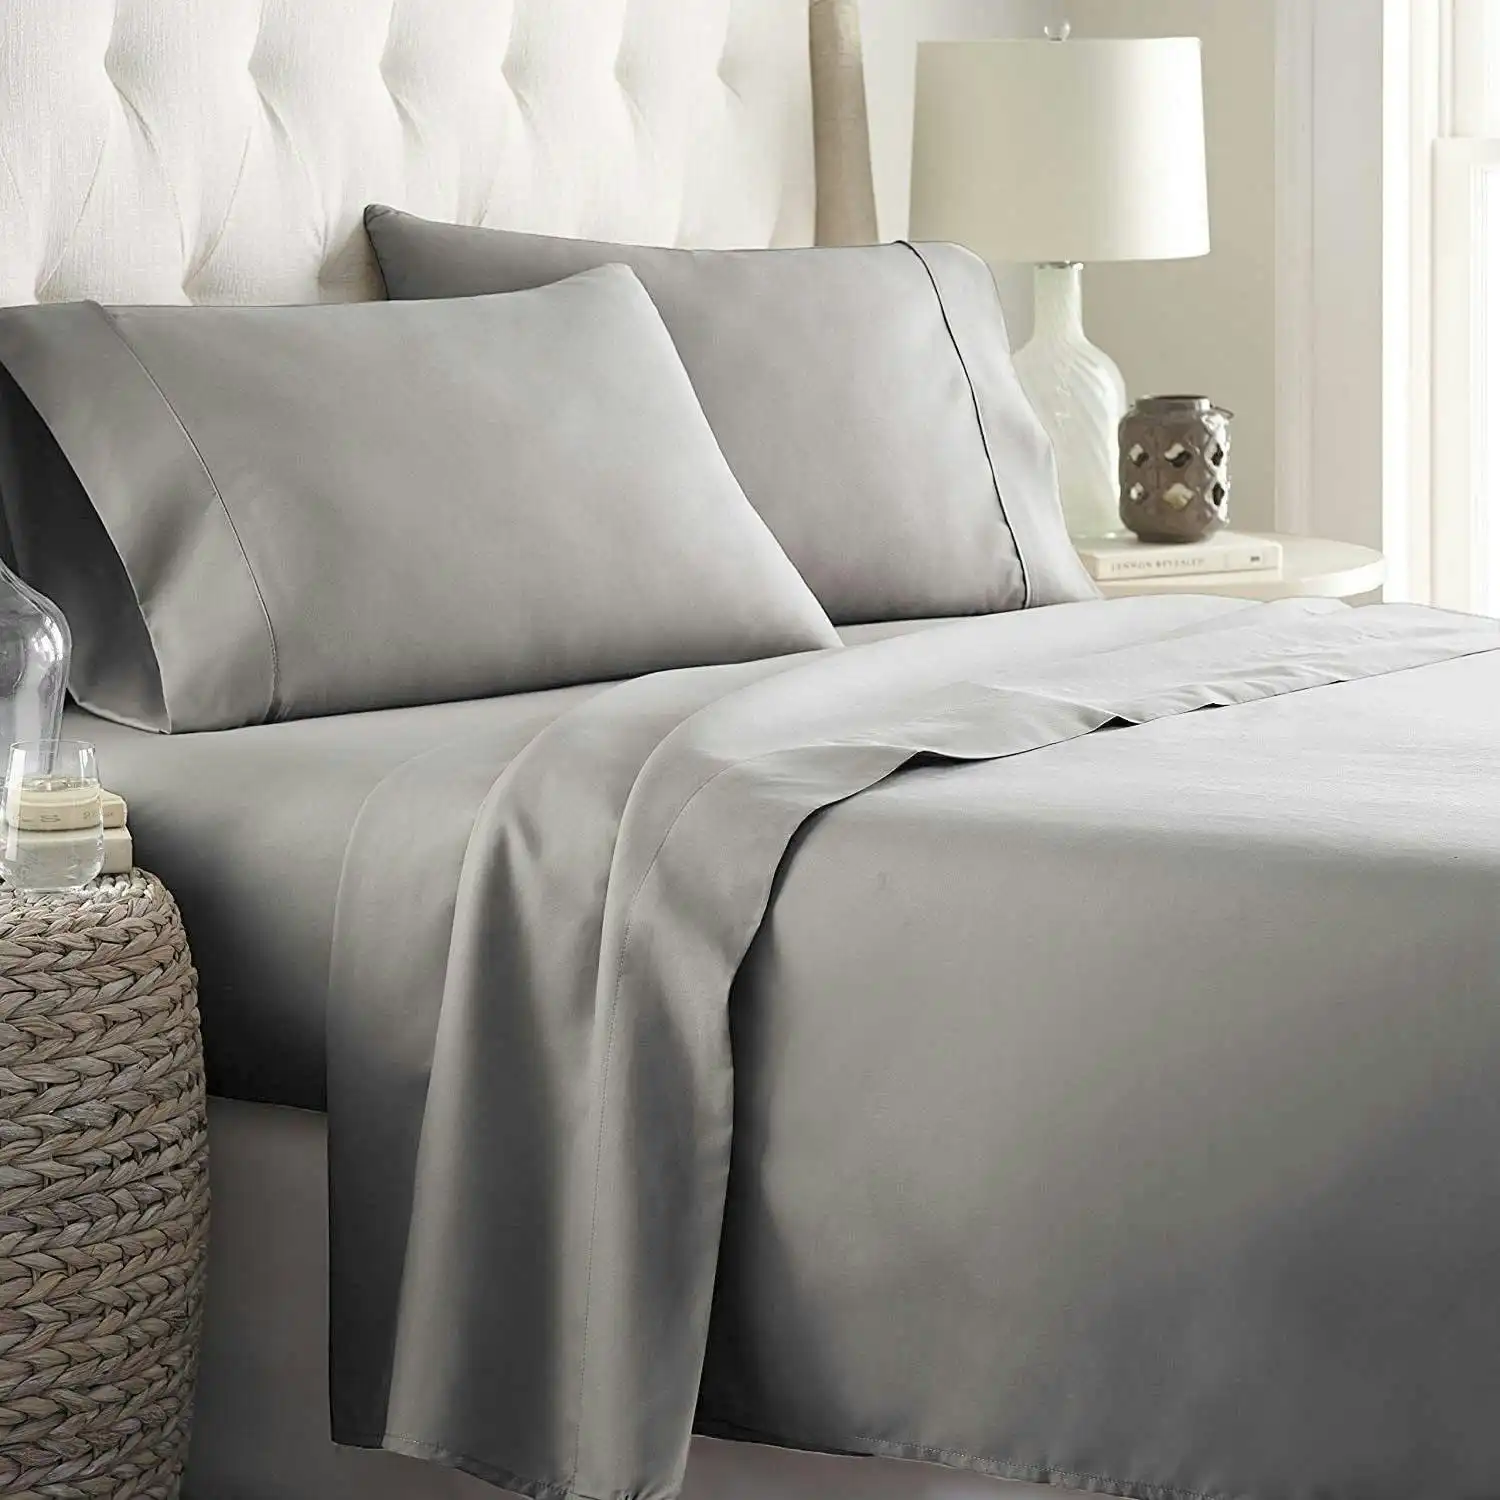 2000TC Ultra-Soft All AU Size Bed Sheet Set, Super King Silver Gray, Luxury Bedding Sheets, Breathable Deep Pocket